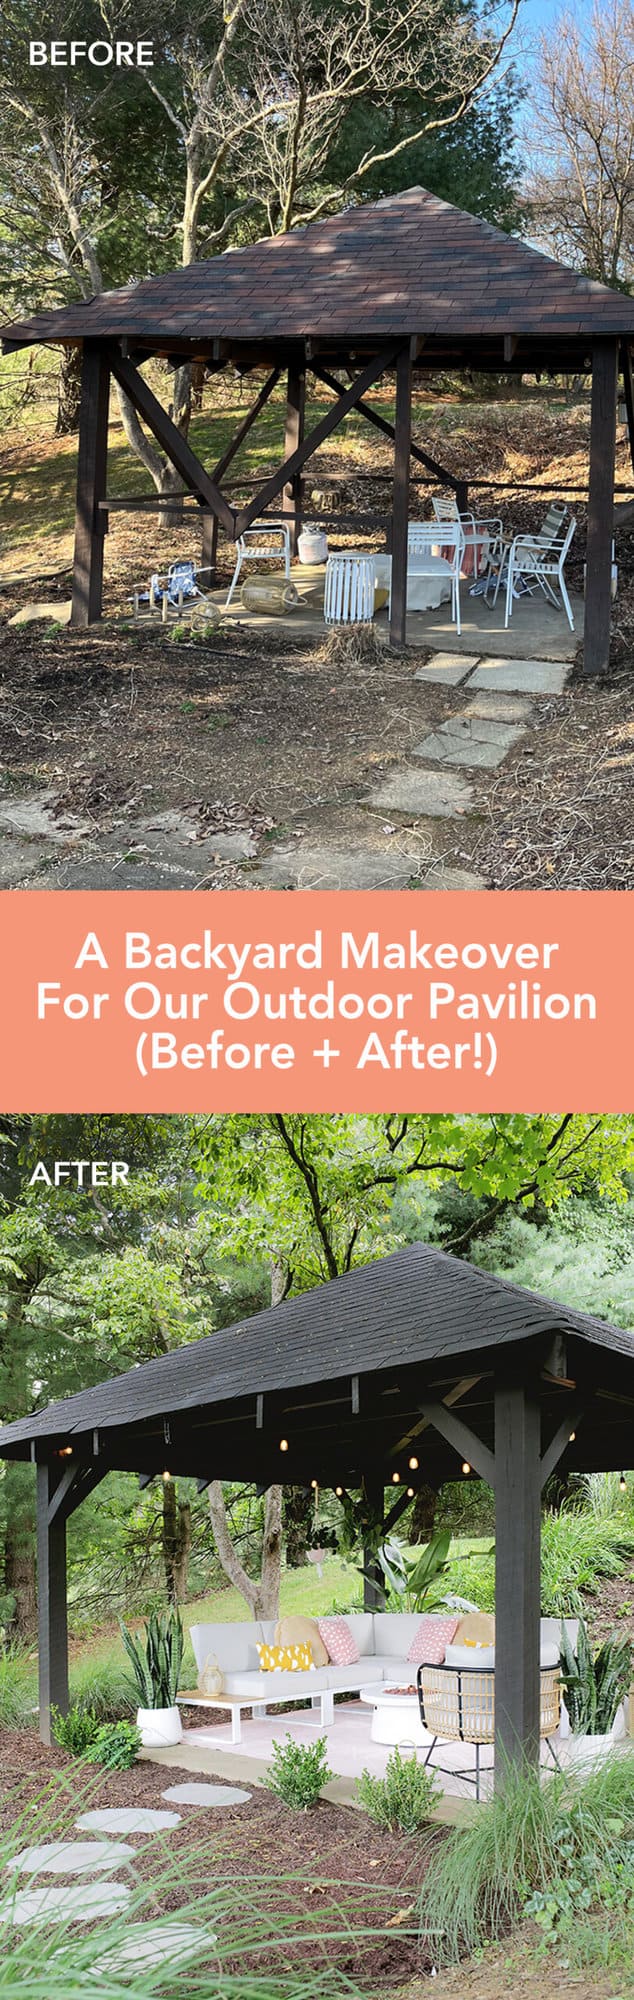 backyard makeover outdoor pavilion before after scaled